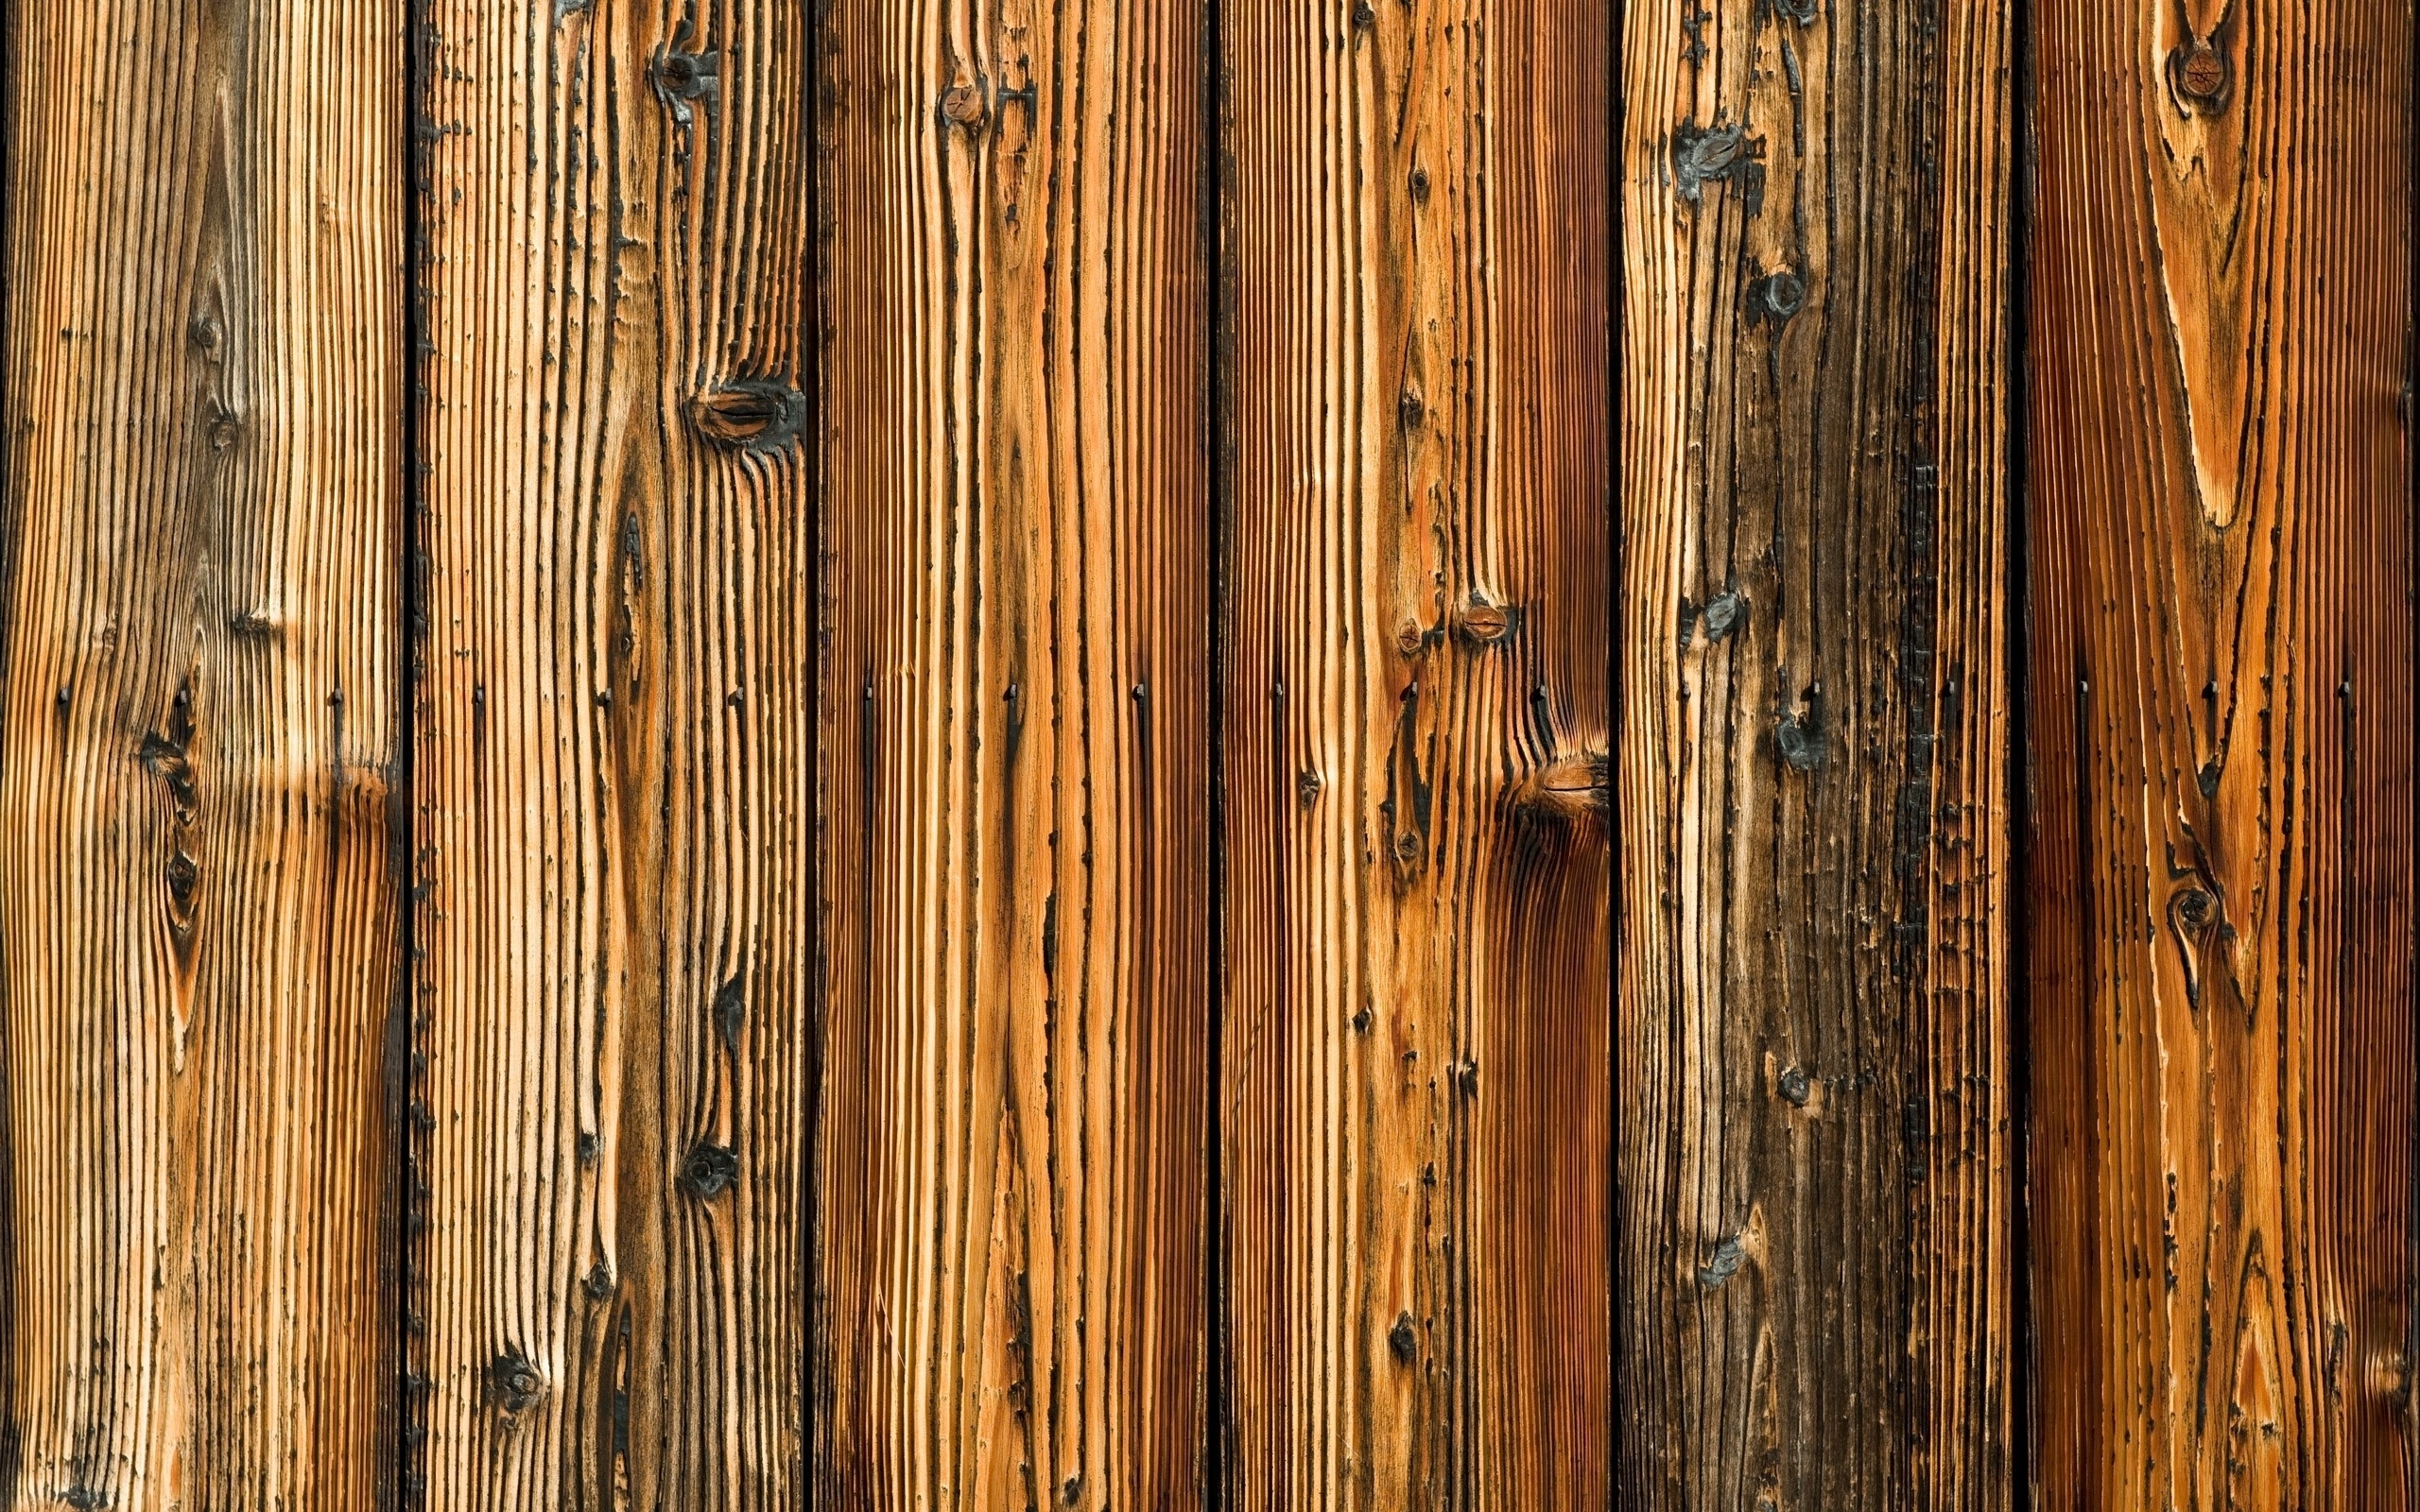 Multicolor wood patterns textures HD Wallpapers 2560x1600